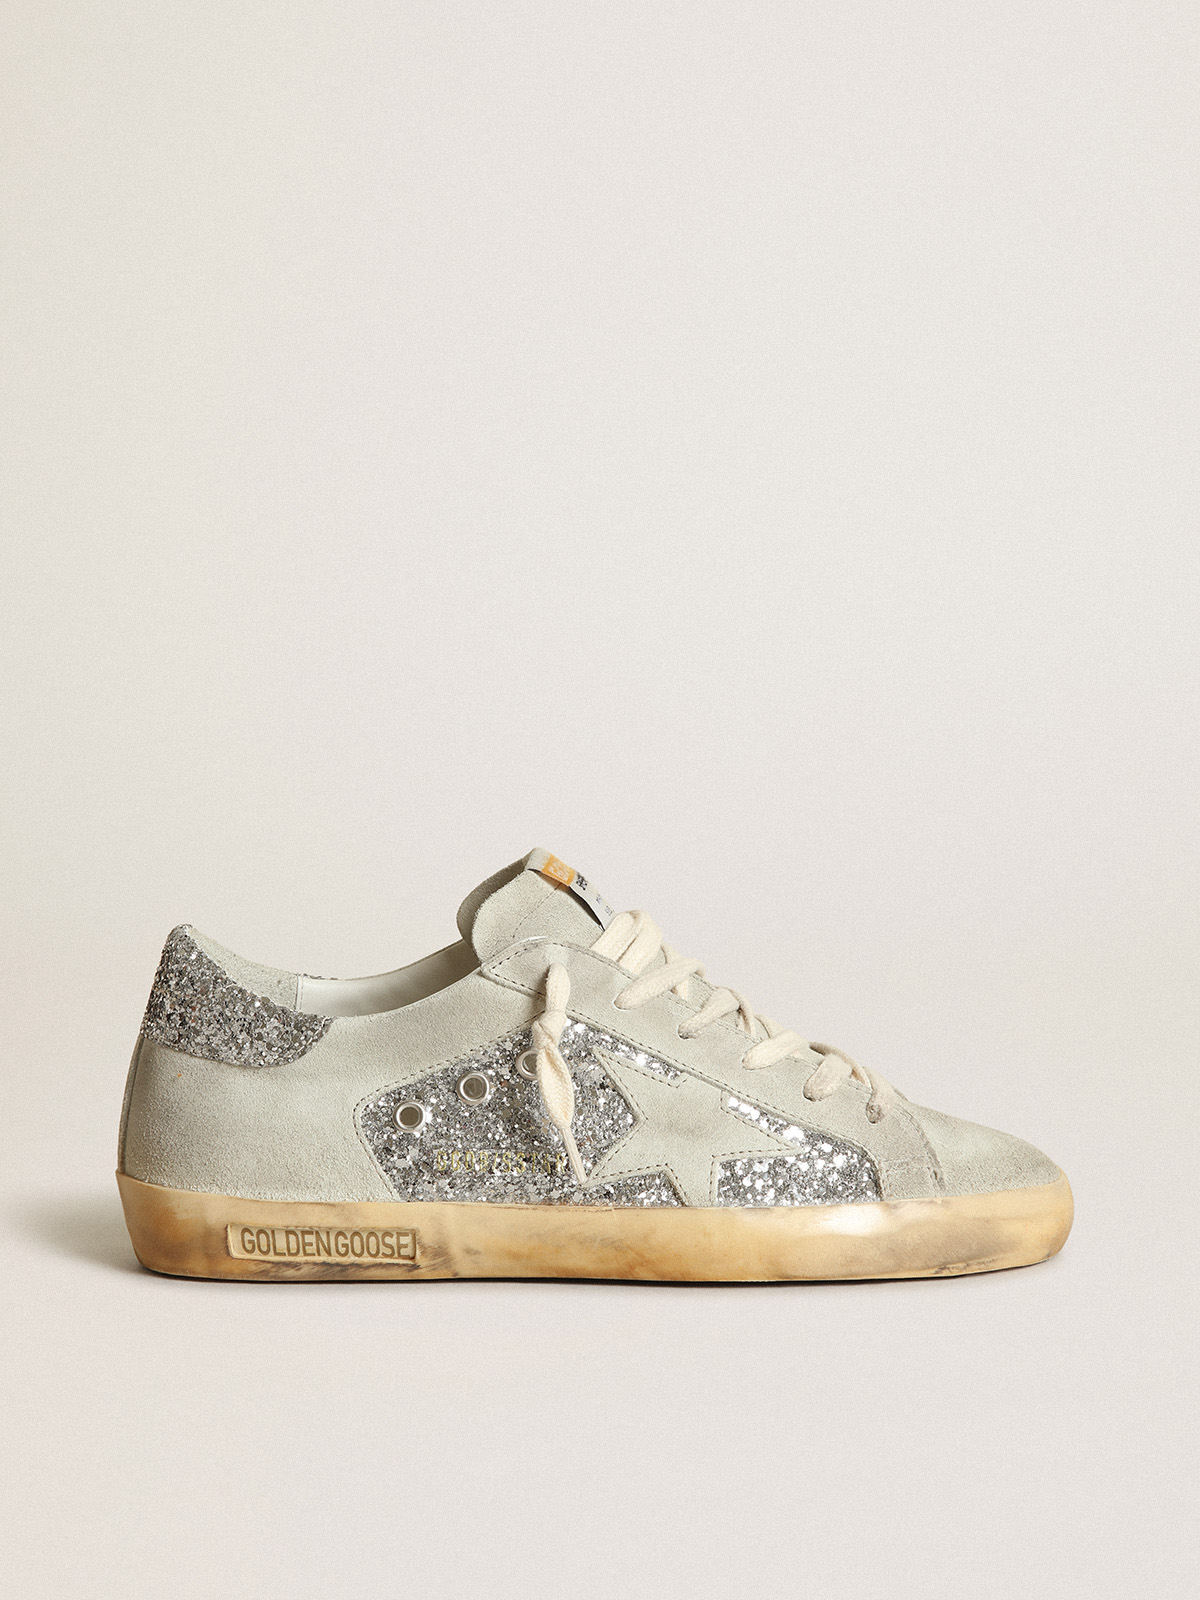 Ball Star Junior in glitter with ice-gray suede inserts